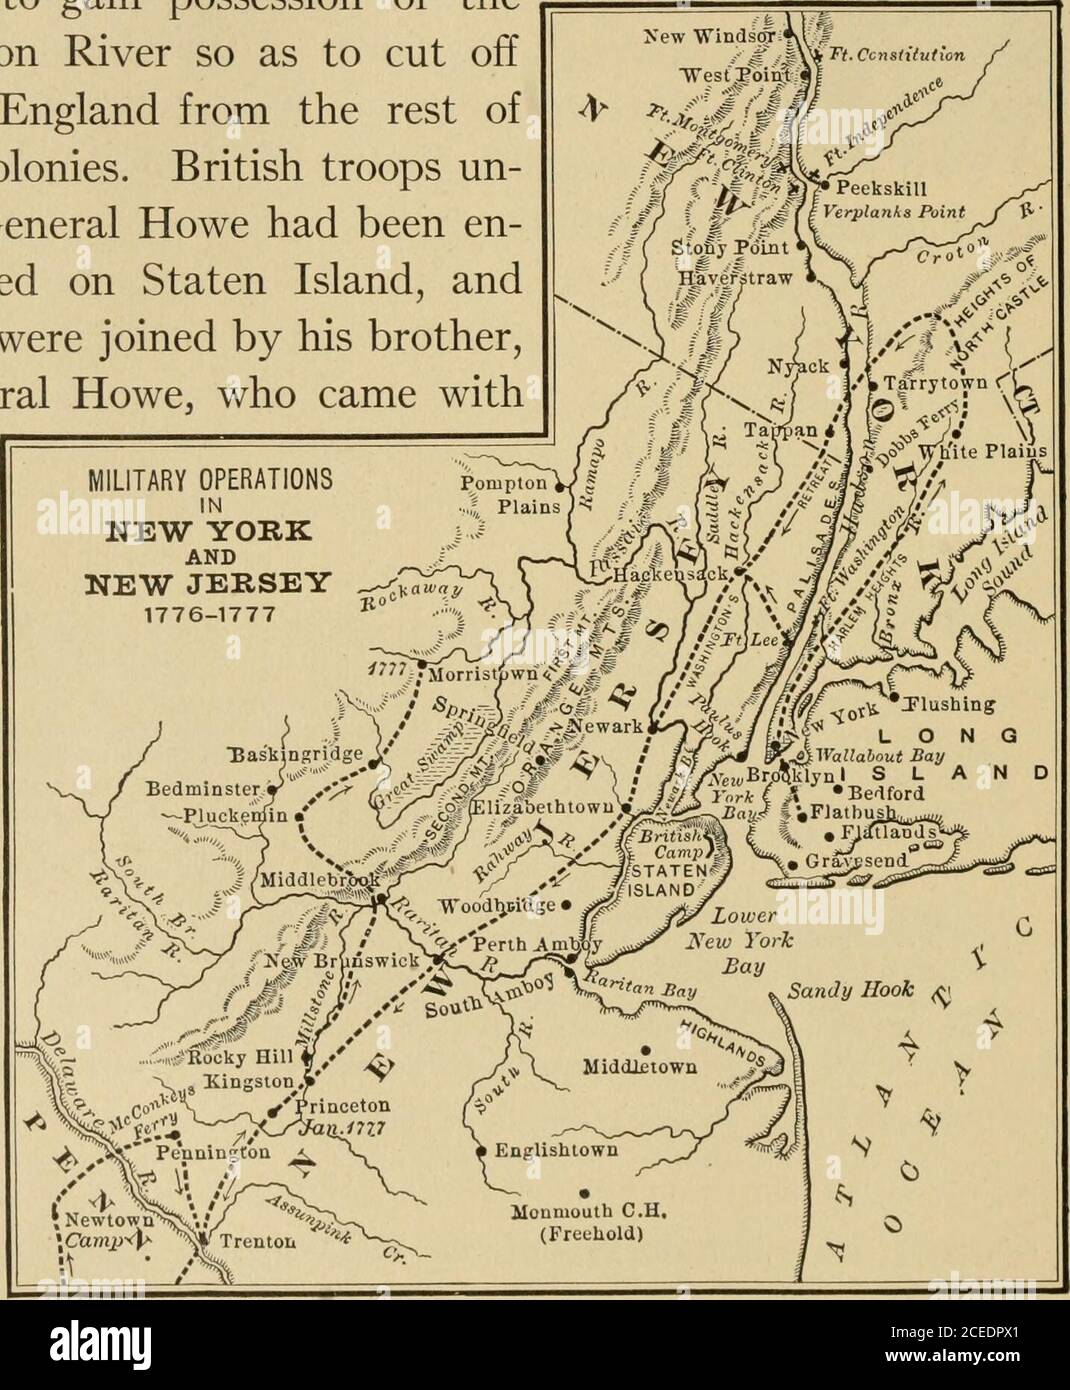 . Our colonial history from the discovery of America to the close of the revolution. 11S-ED CHAPTER XIV. THE WAR IN THE MIDDLE STATES 187. The War in New York and New Jersey.—The Britishtried to gain possession of theHudson River so as to cut offNew England from the rest ofthe colonies. British troops un-der General Howe had been en-camped on Staten Island, andthey were joined by his brother,Admiral Howe, who came with. 158 THE WAR IN THE MIDDLE STATES 159 a fleet and reinforcements. To prevent the British fromascending the Hudson, Forts Washington and Lee werebuilt {see map, page 158). Genera Stock Photo